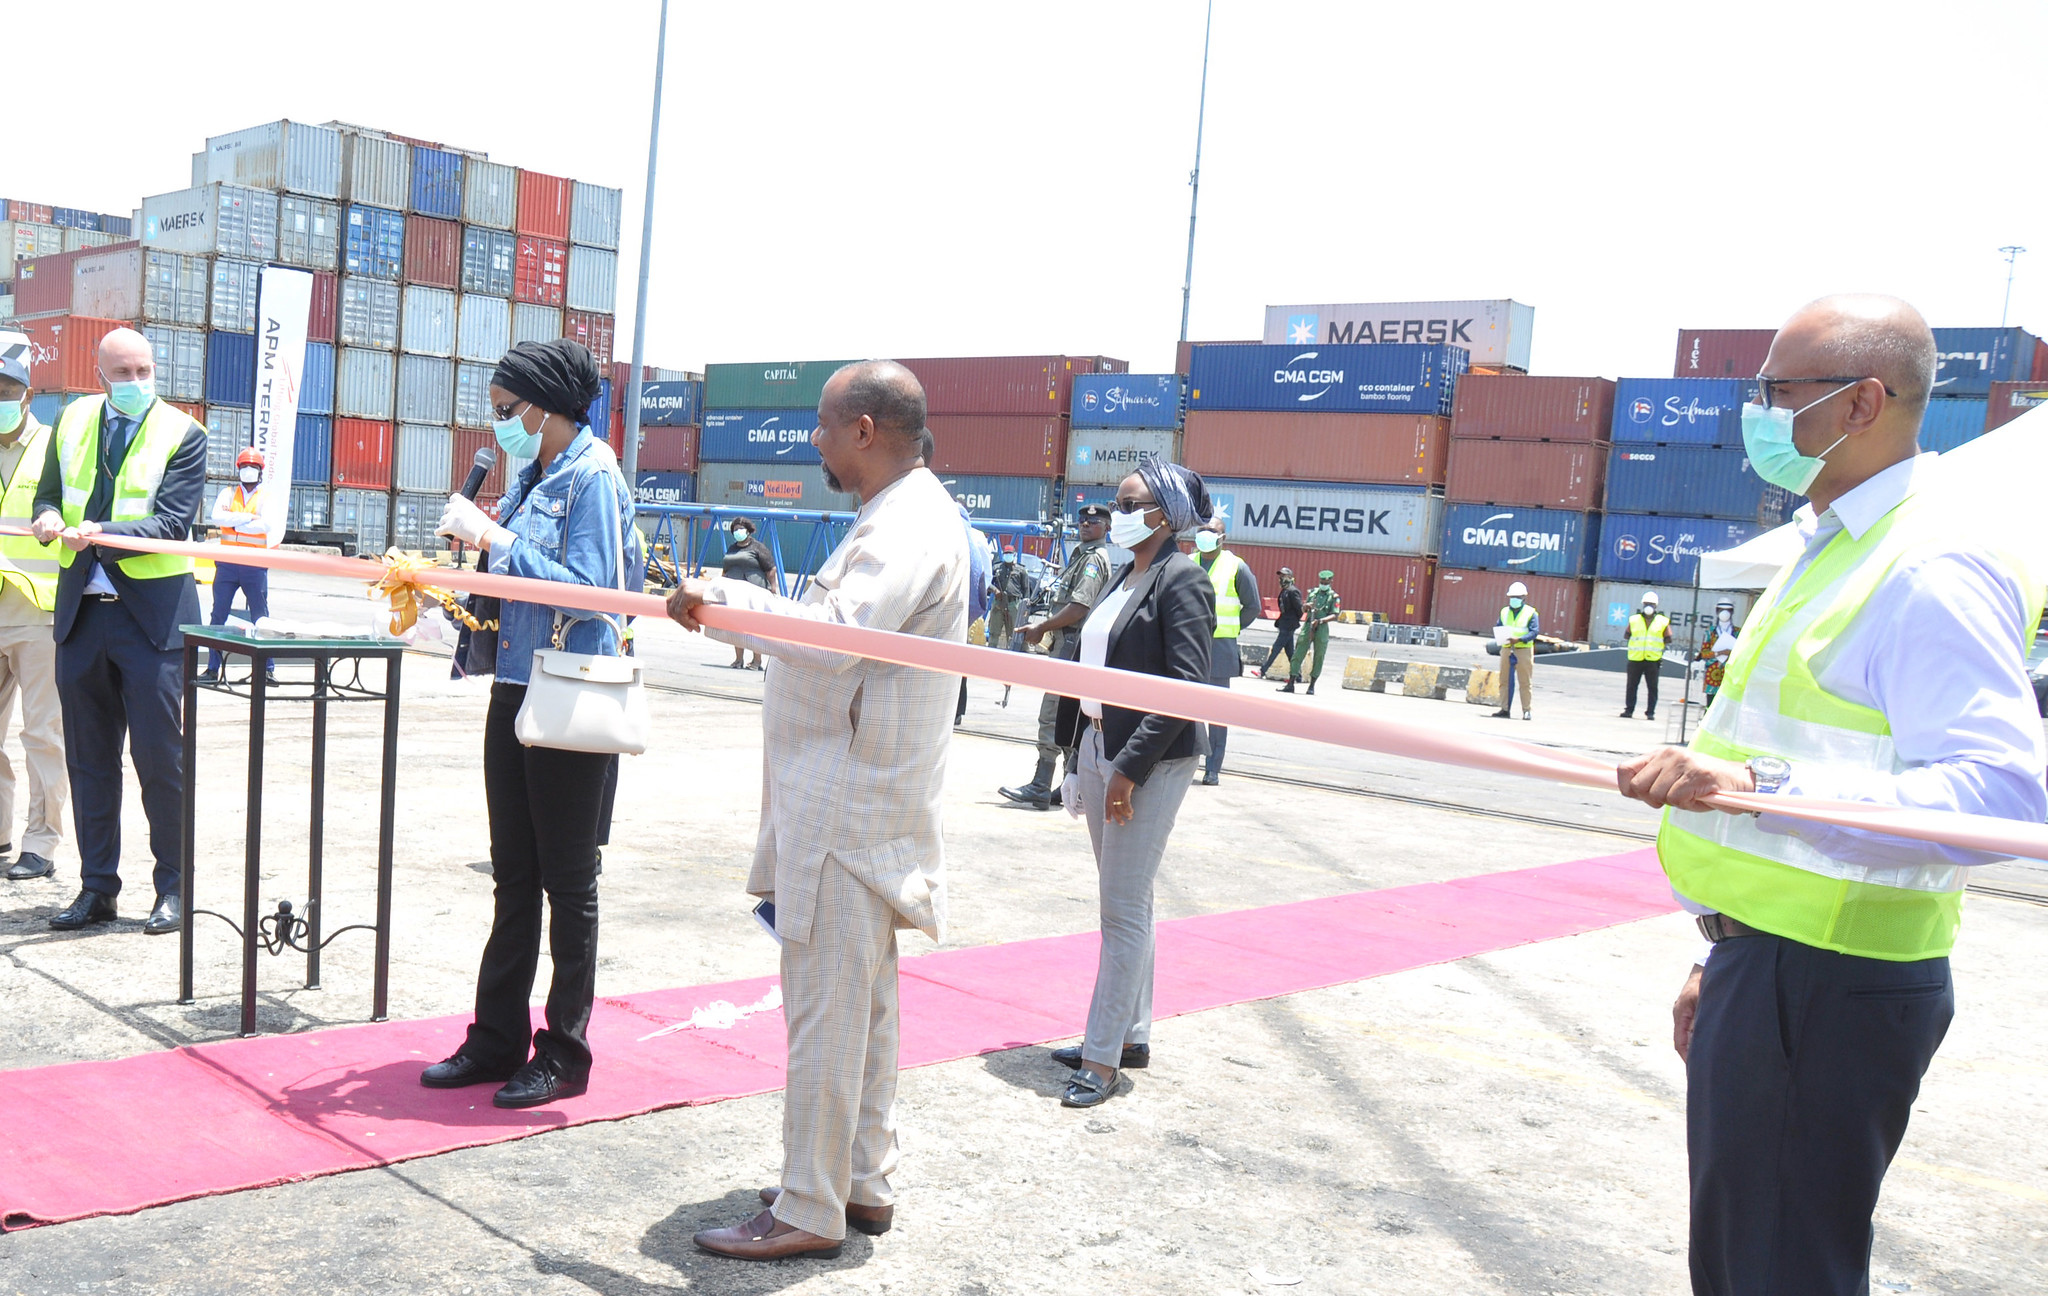 APM Terminals Apapa commences $80m upgrade with commissioning of new cranes